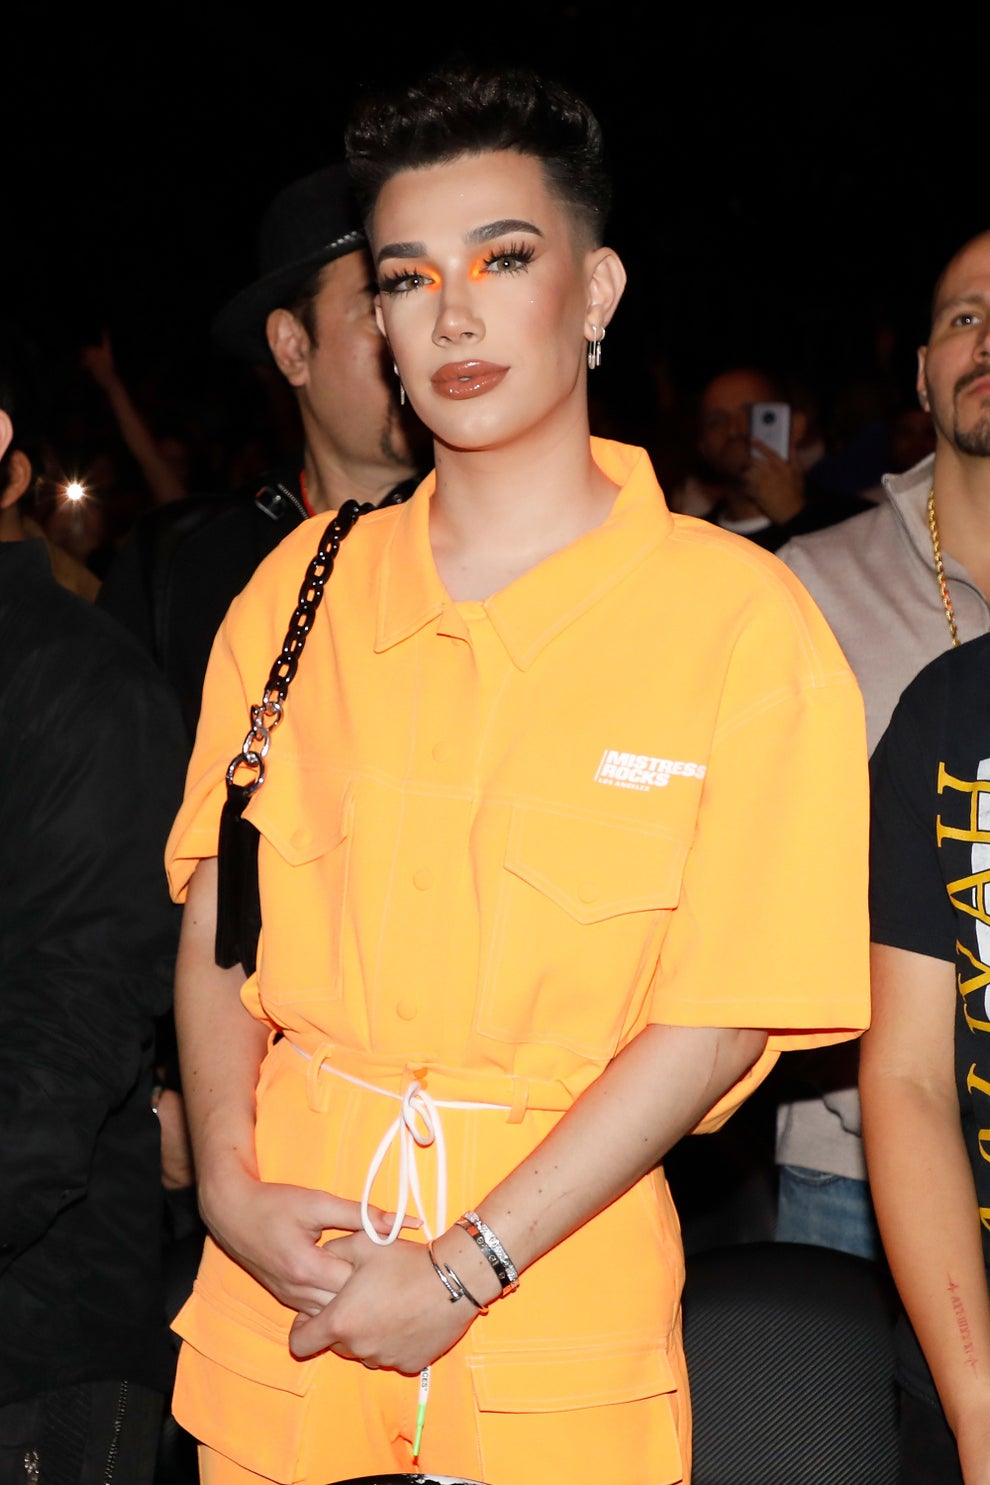 No Matter What They’re Accused Of, Influencers Like James Charles ...